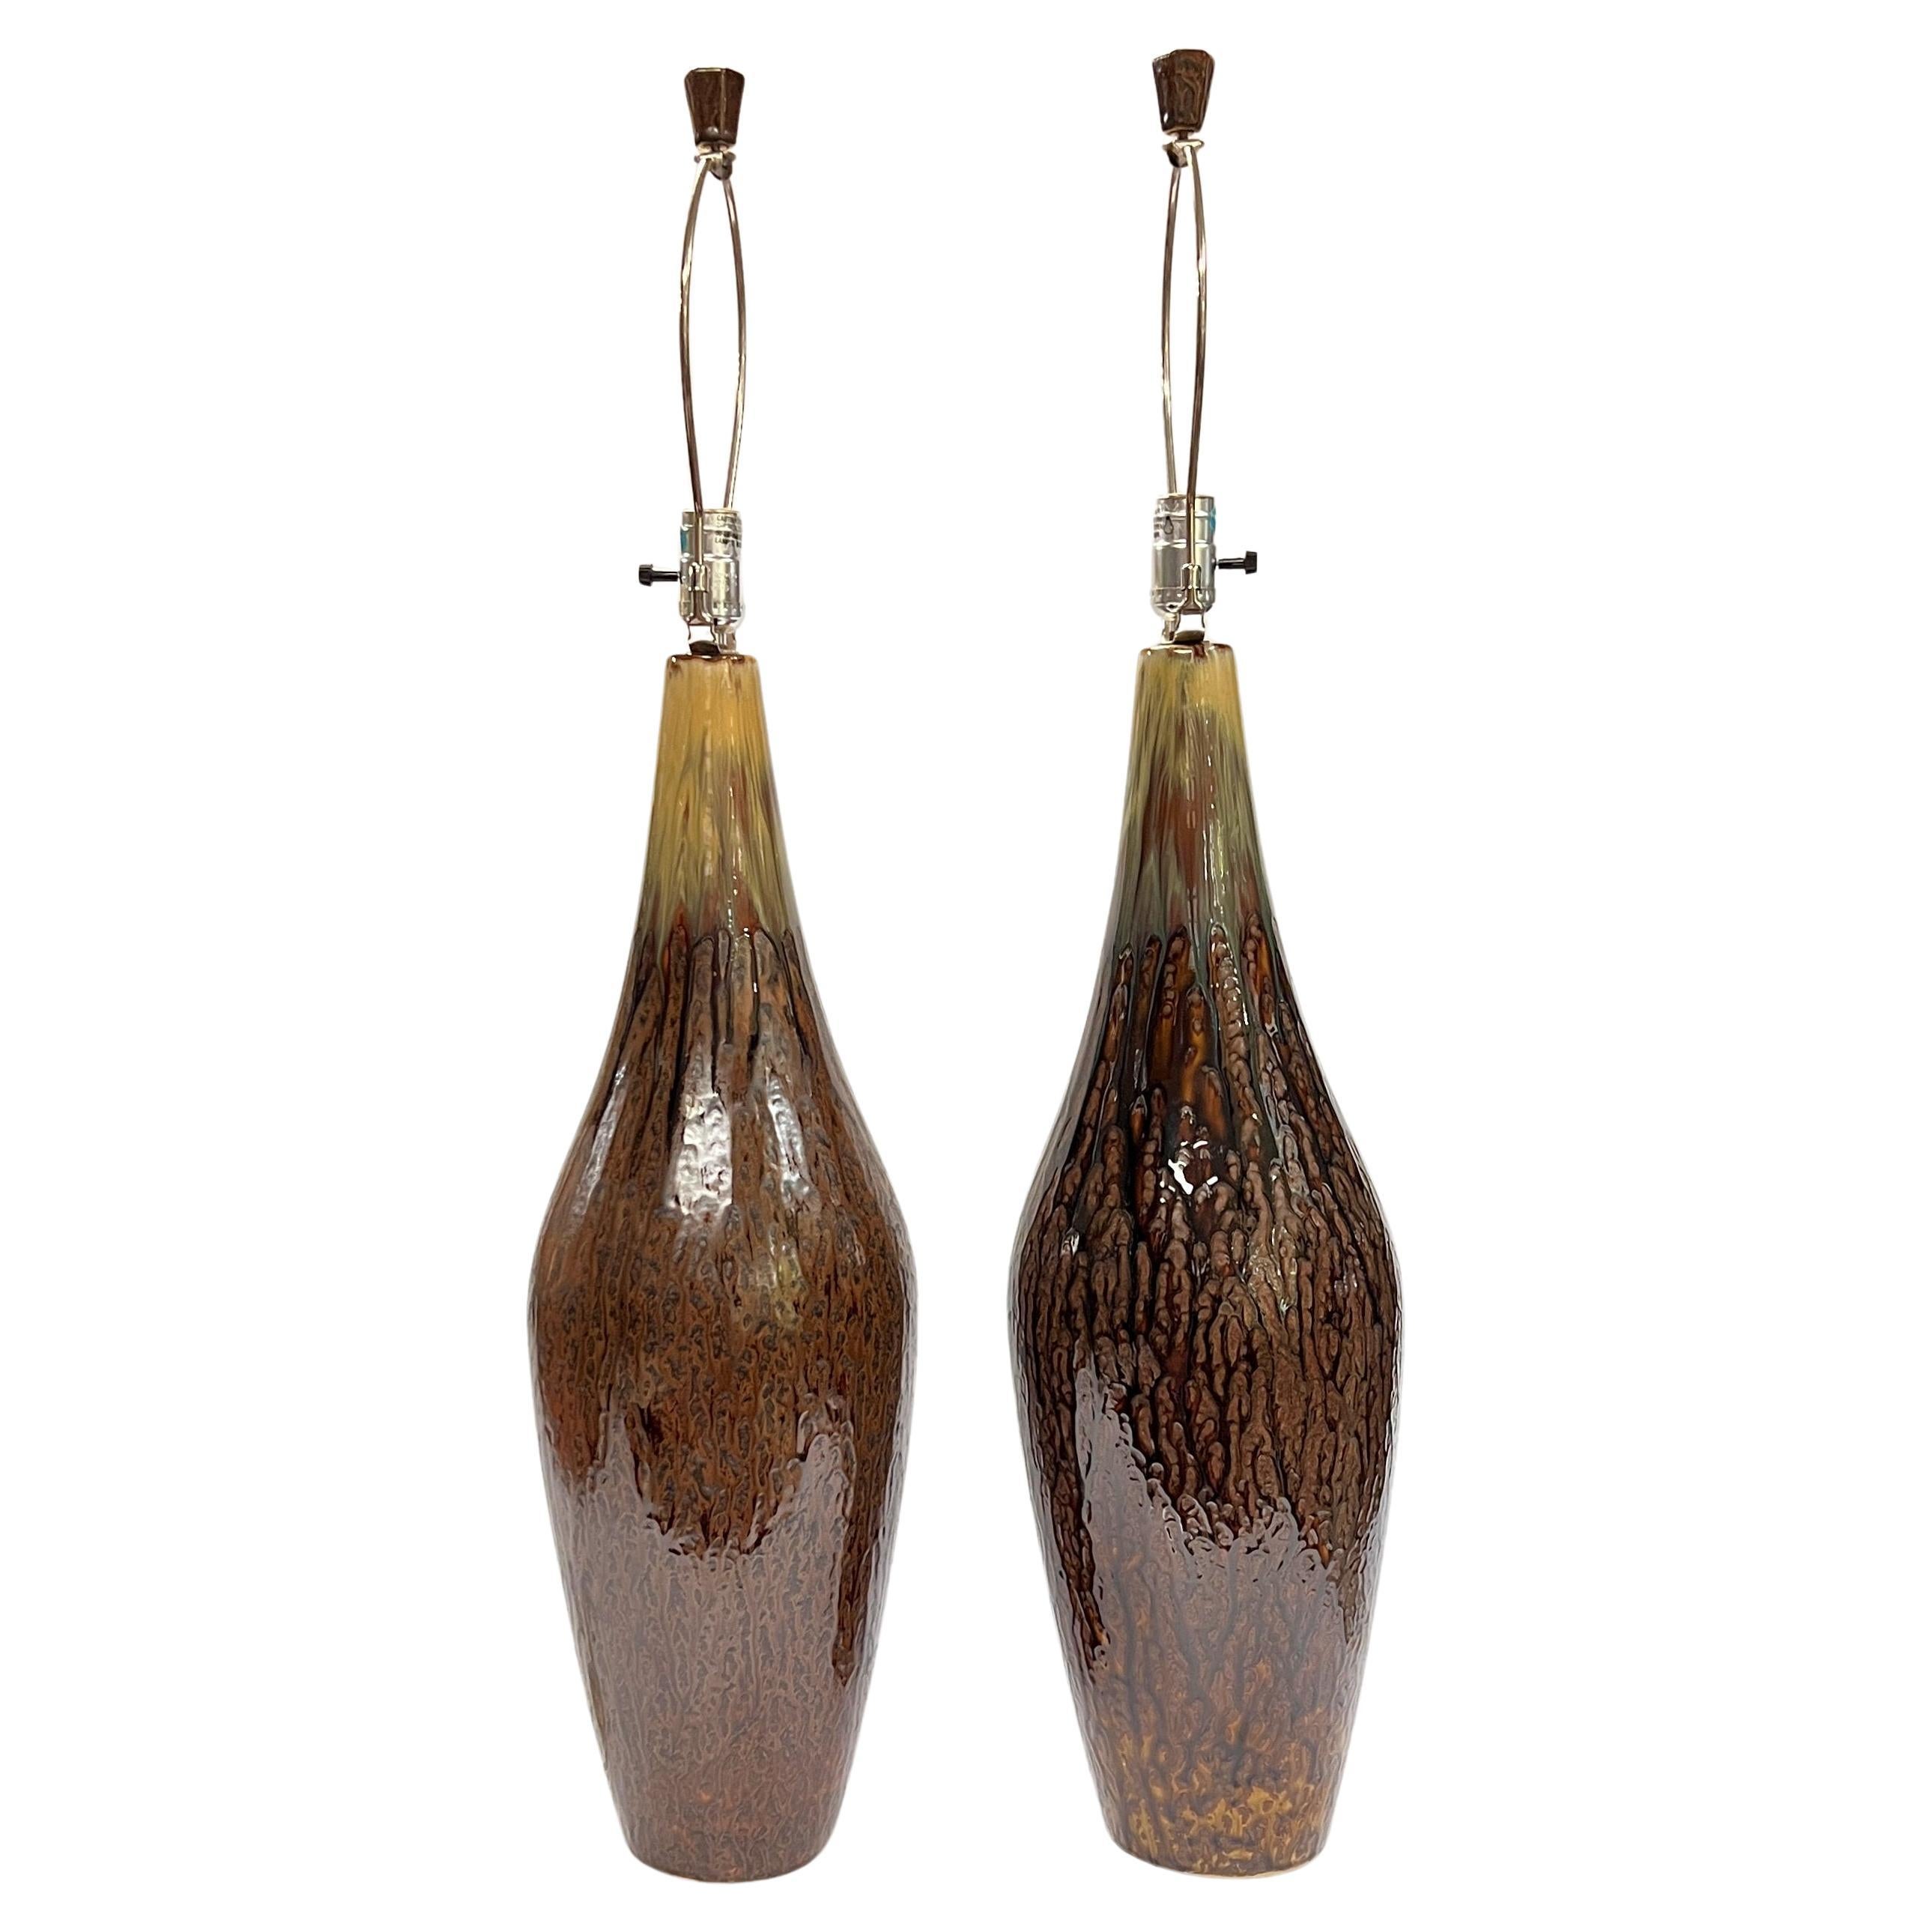 Pair Mid-Century Modern Amber and Brown Glazed Ceramic Table Lamps